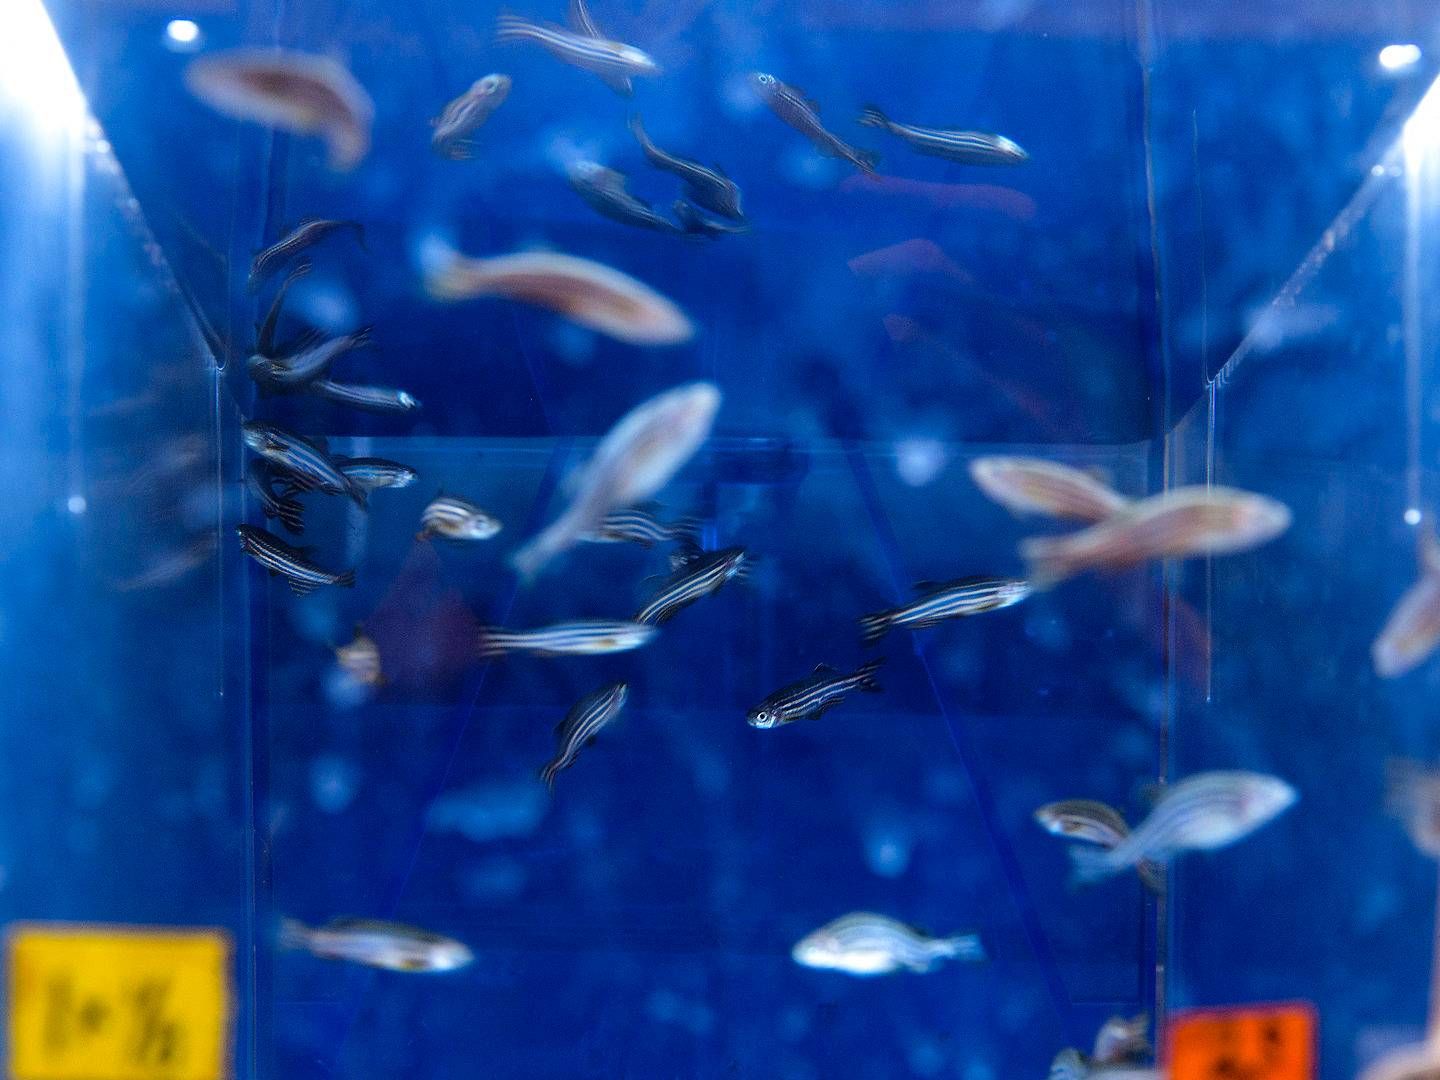 Zebrafish have been a hot topic withing drug discovery since the early 2000s, but it isn't until recently that the method has matured | Photo: Peter Hove Olesen/Politiken/Ritzau Scanpix